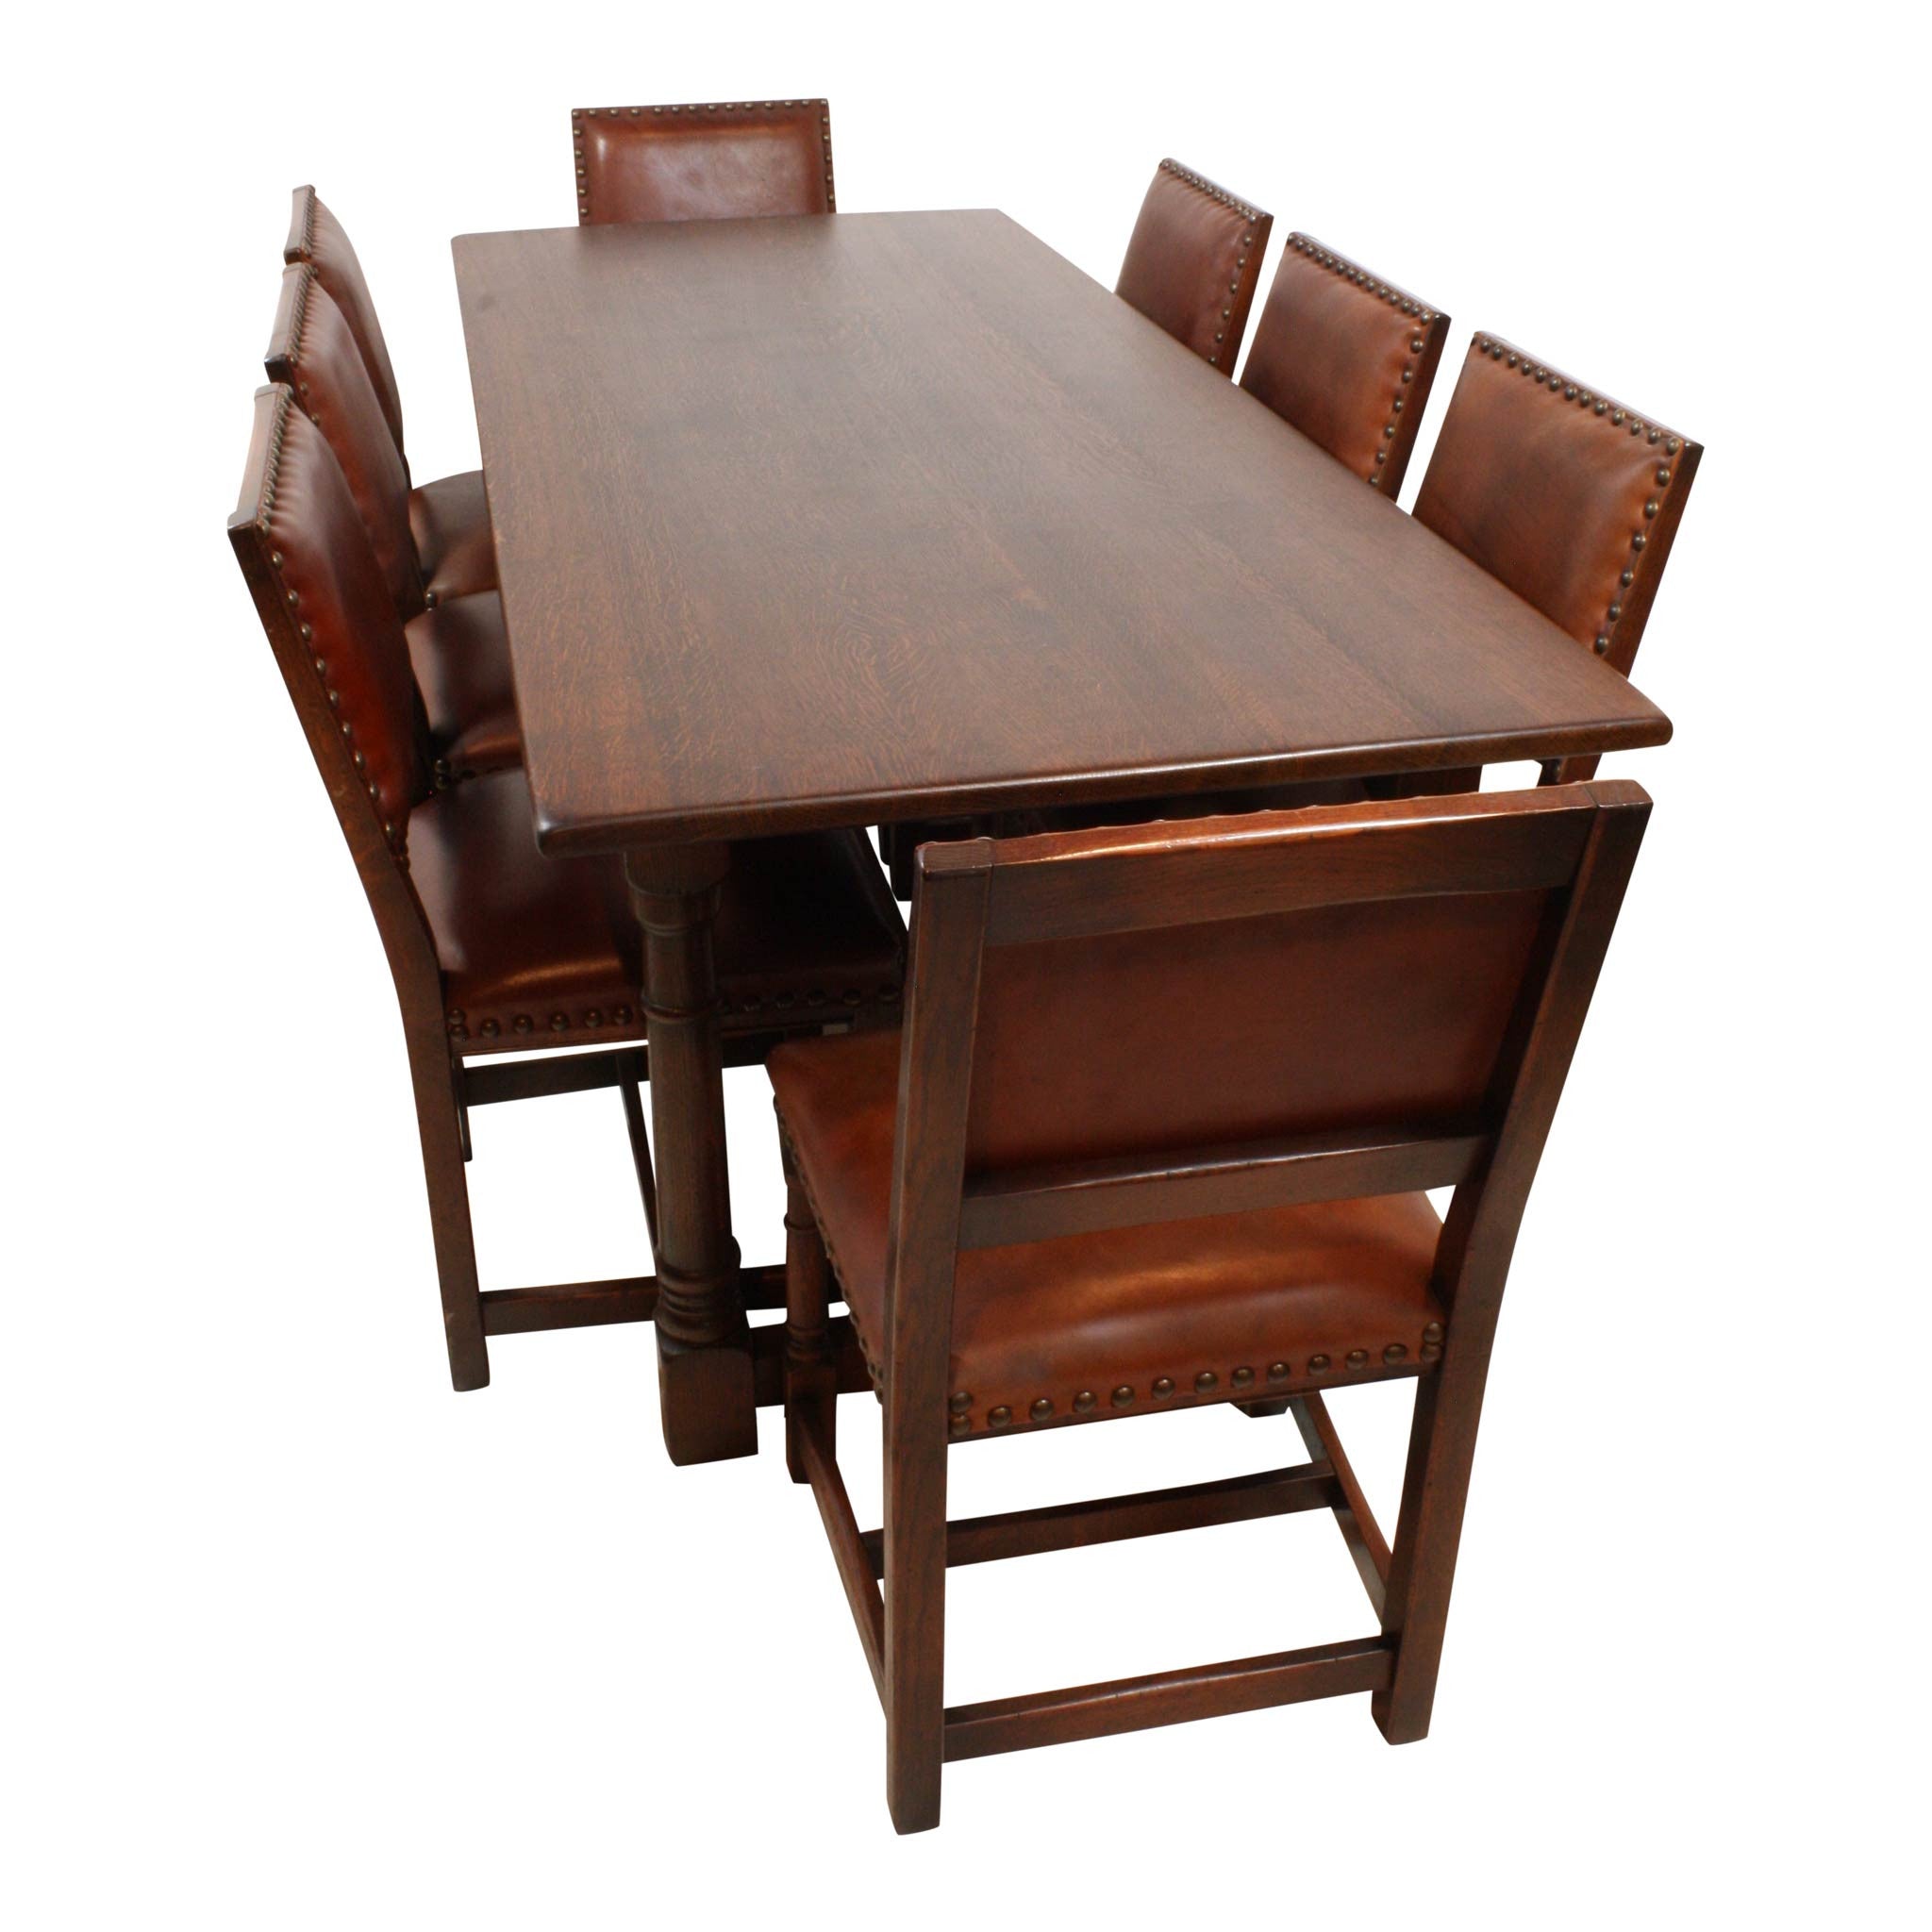 Large Oak Dining Room Table W/ 8 Chairs.